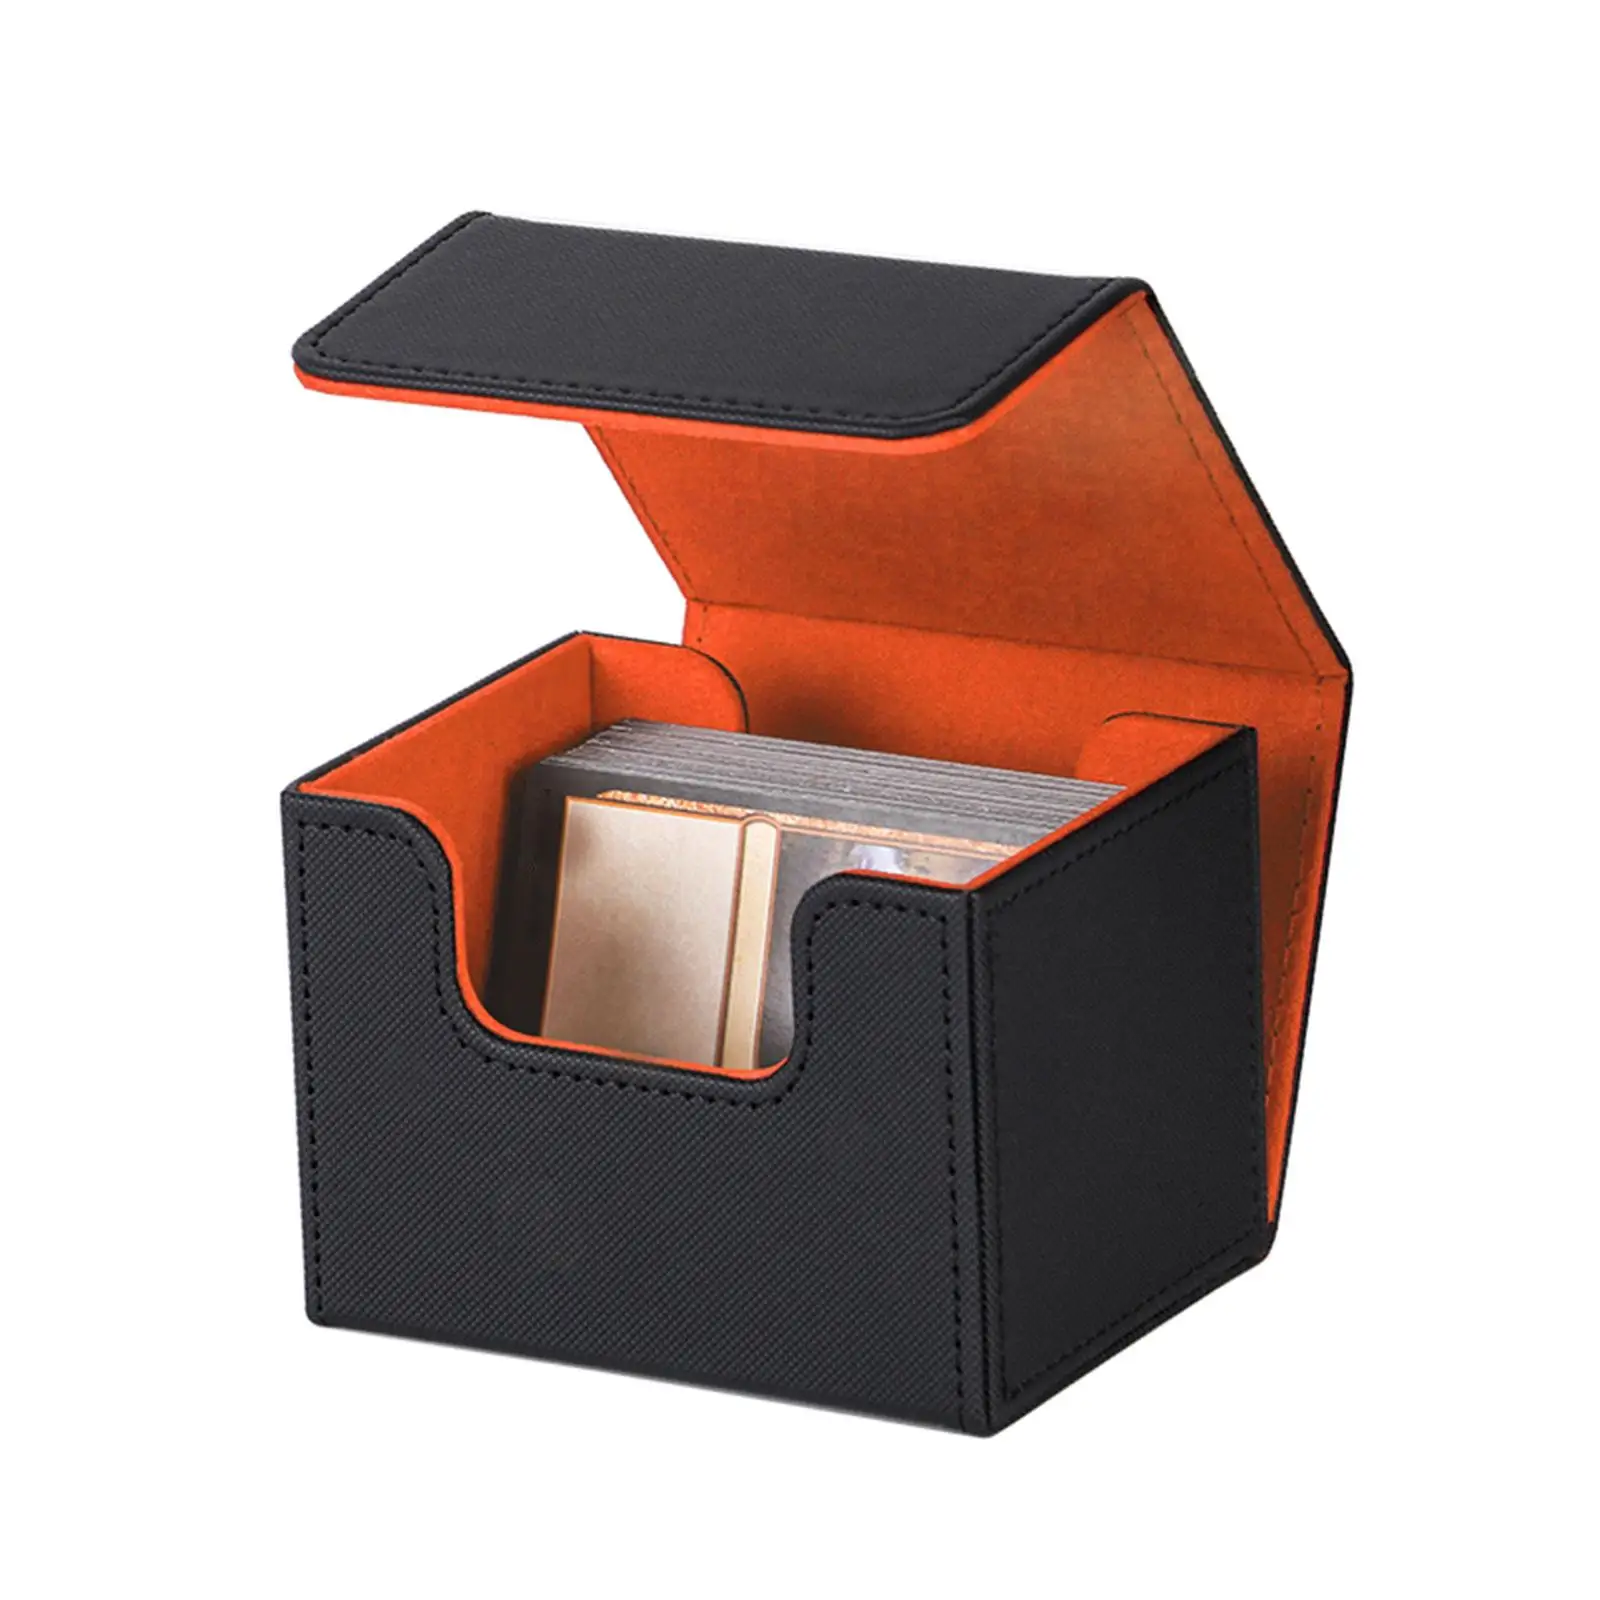 Trading Card Deck Box Storage Container for 100+ Cards Baseball Card Case